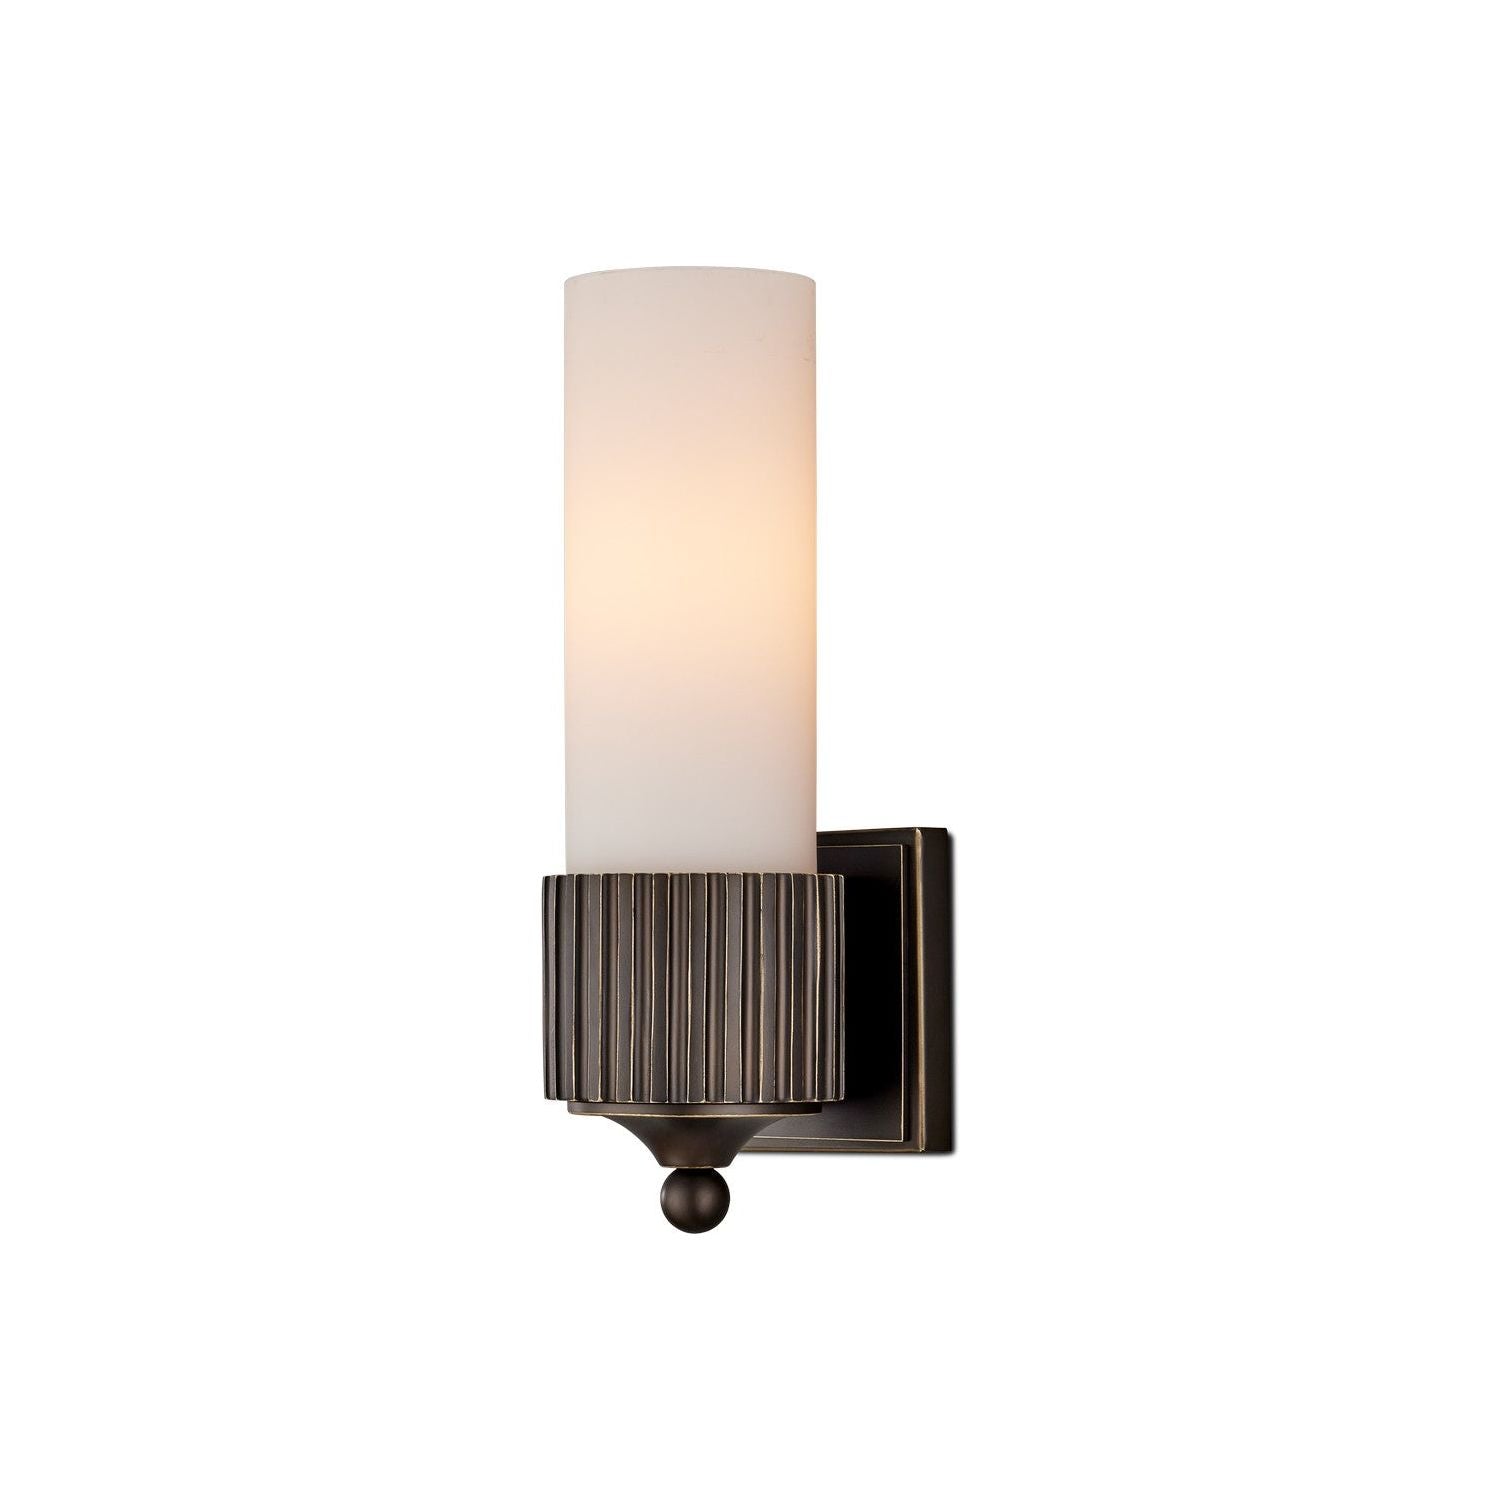 Currey and Company - 5800-0048 - One Light Wall Sconce - Oil Rubbed Bronze/Frosted